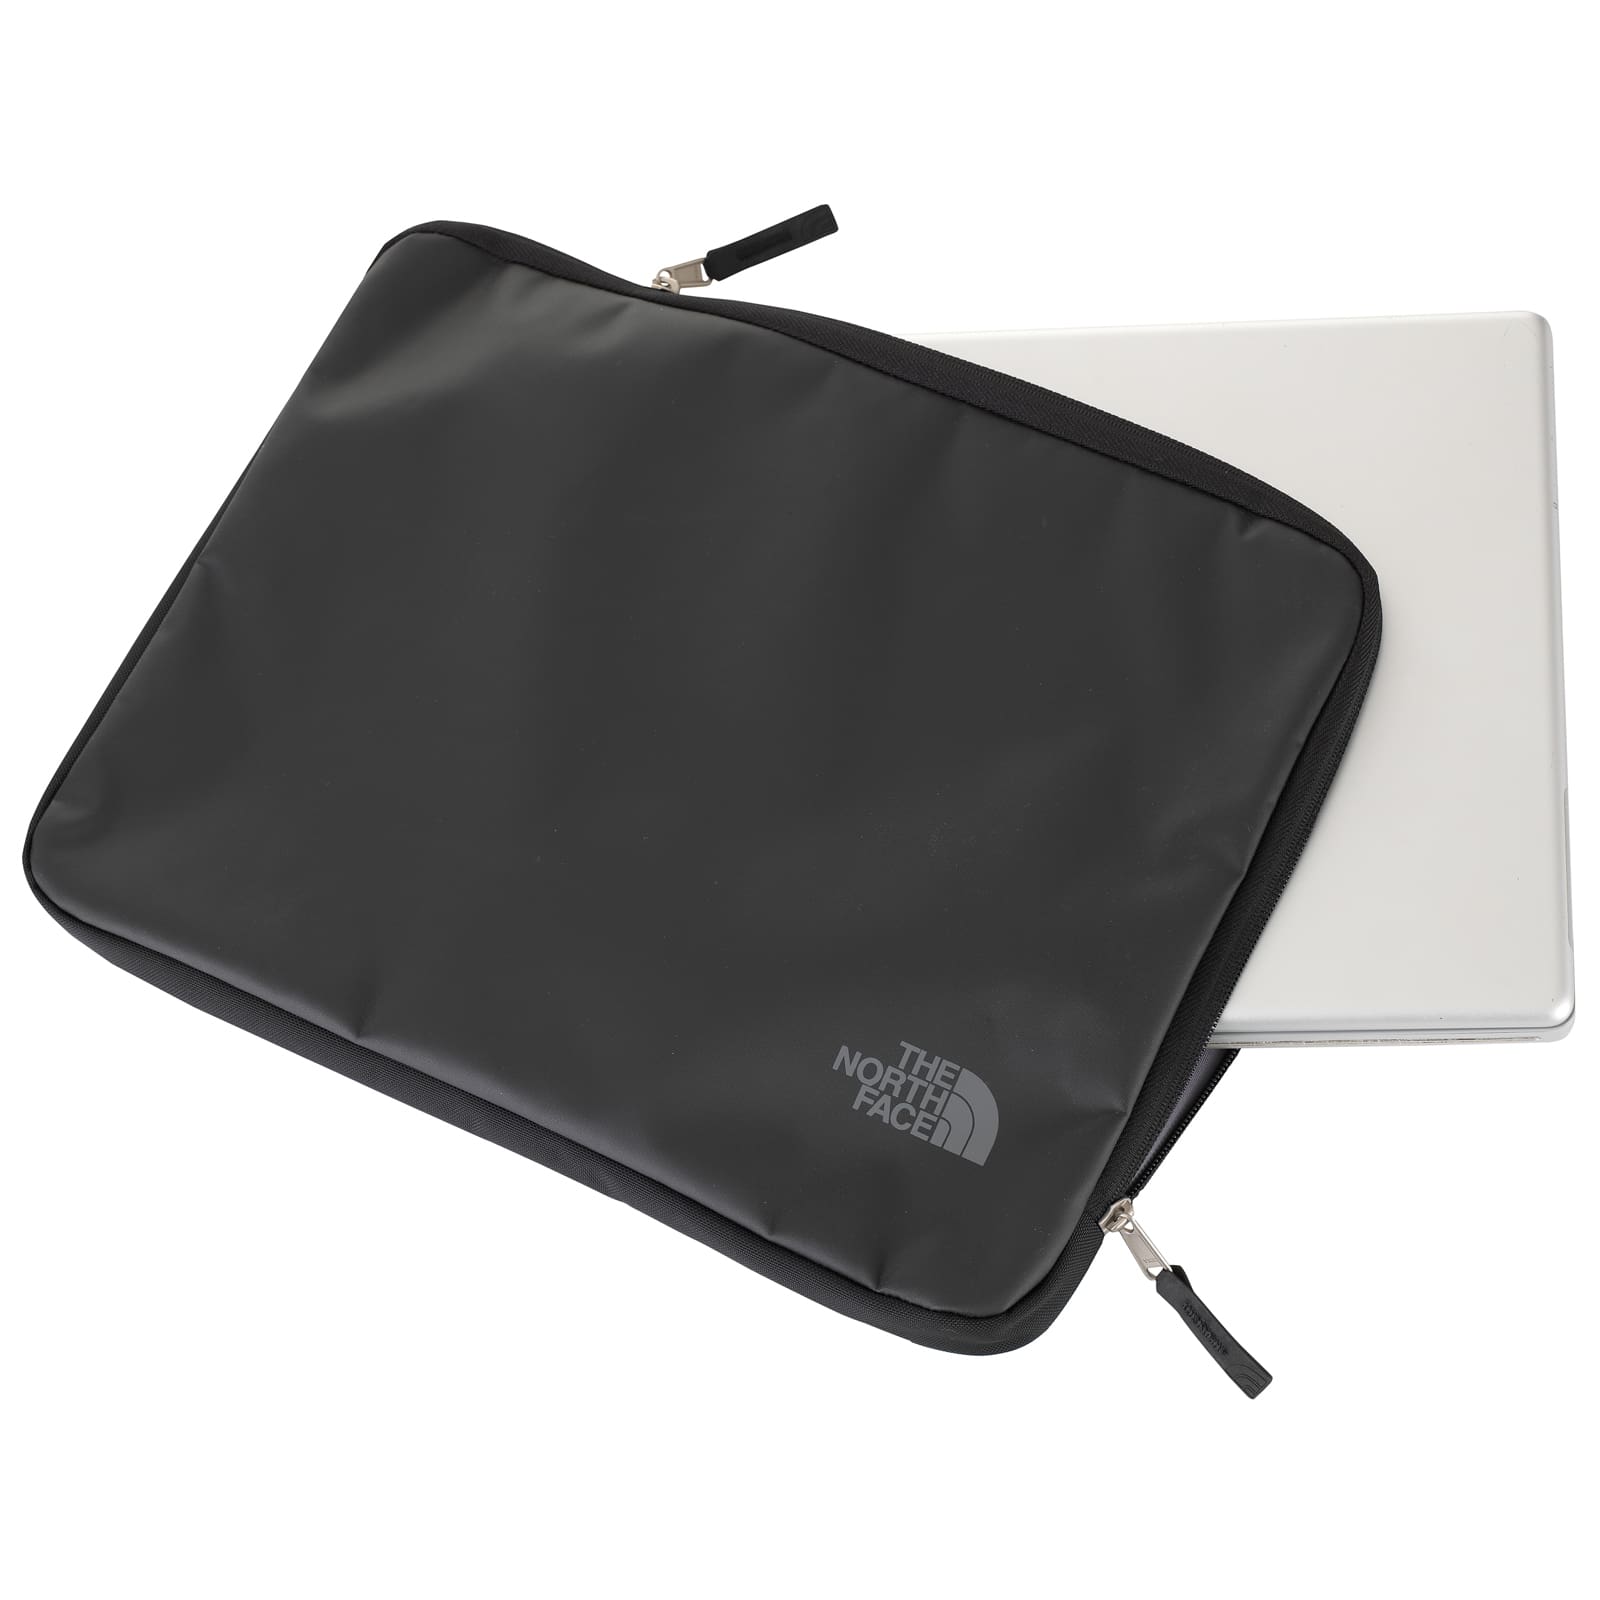 Buy The North Face Laptop Case 15 